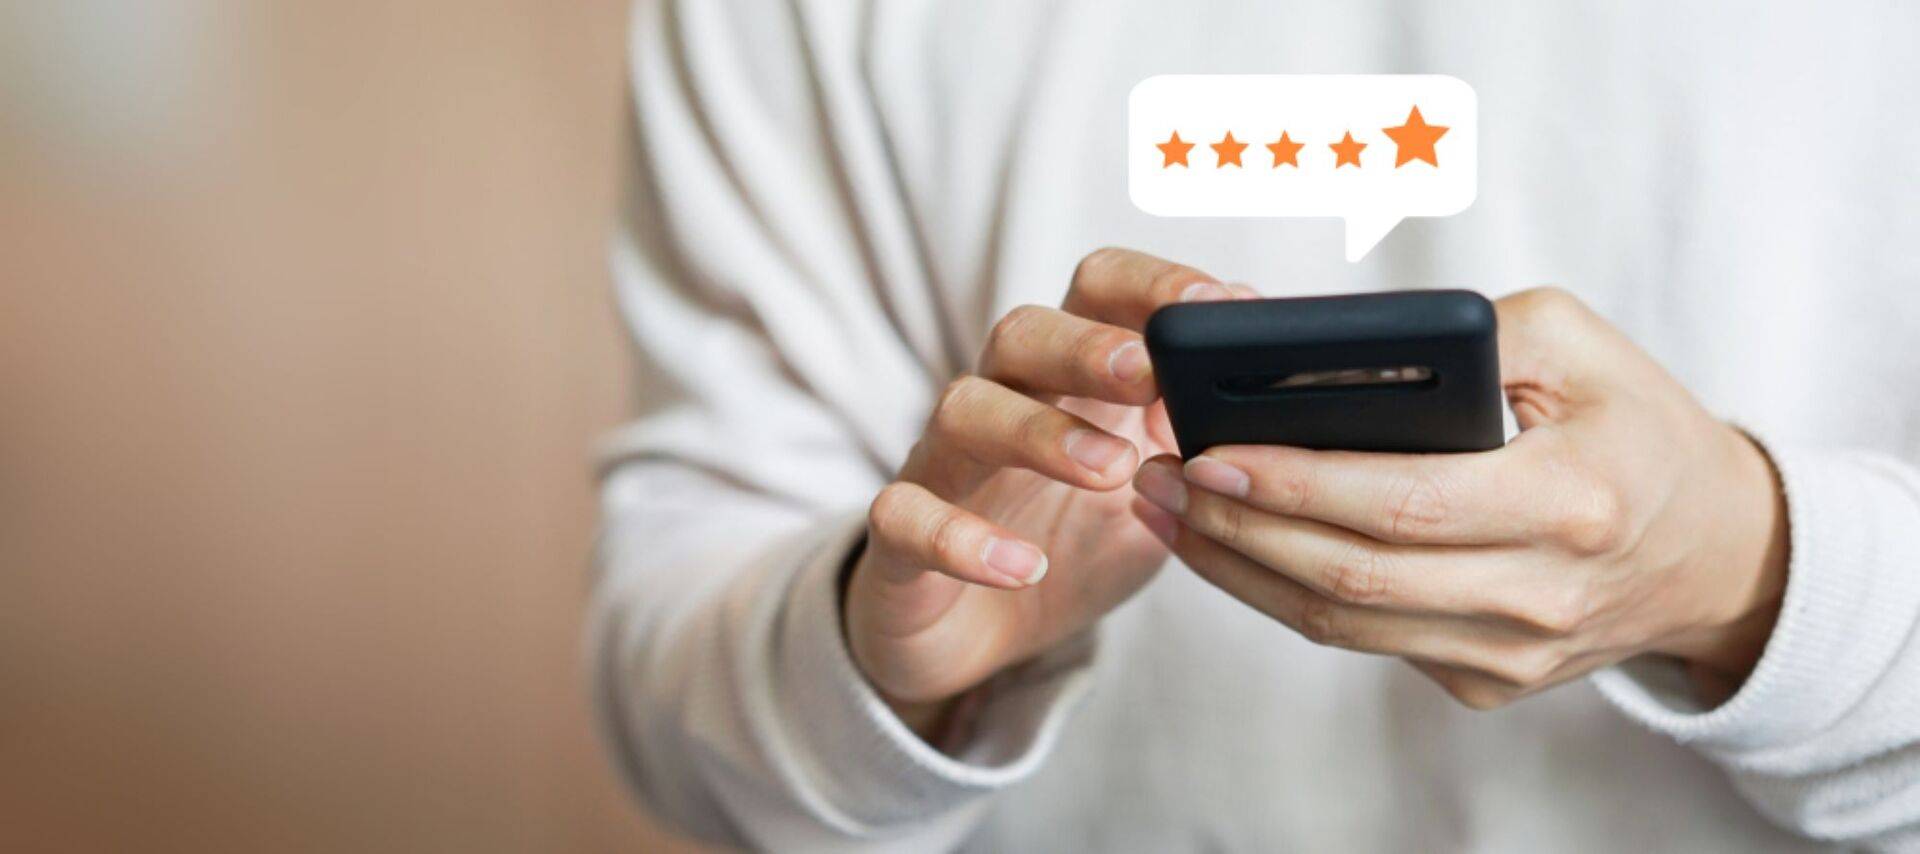 Leveraging customers' reviews in your marketing campaigns